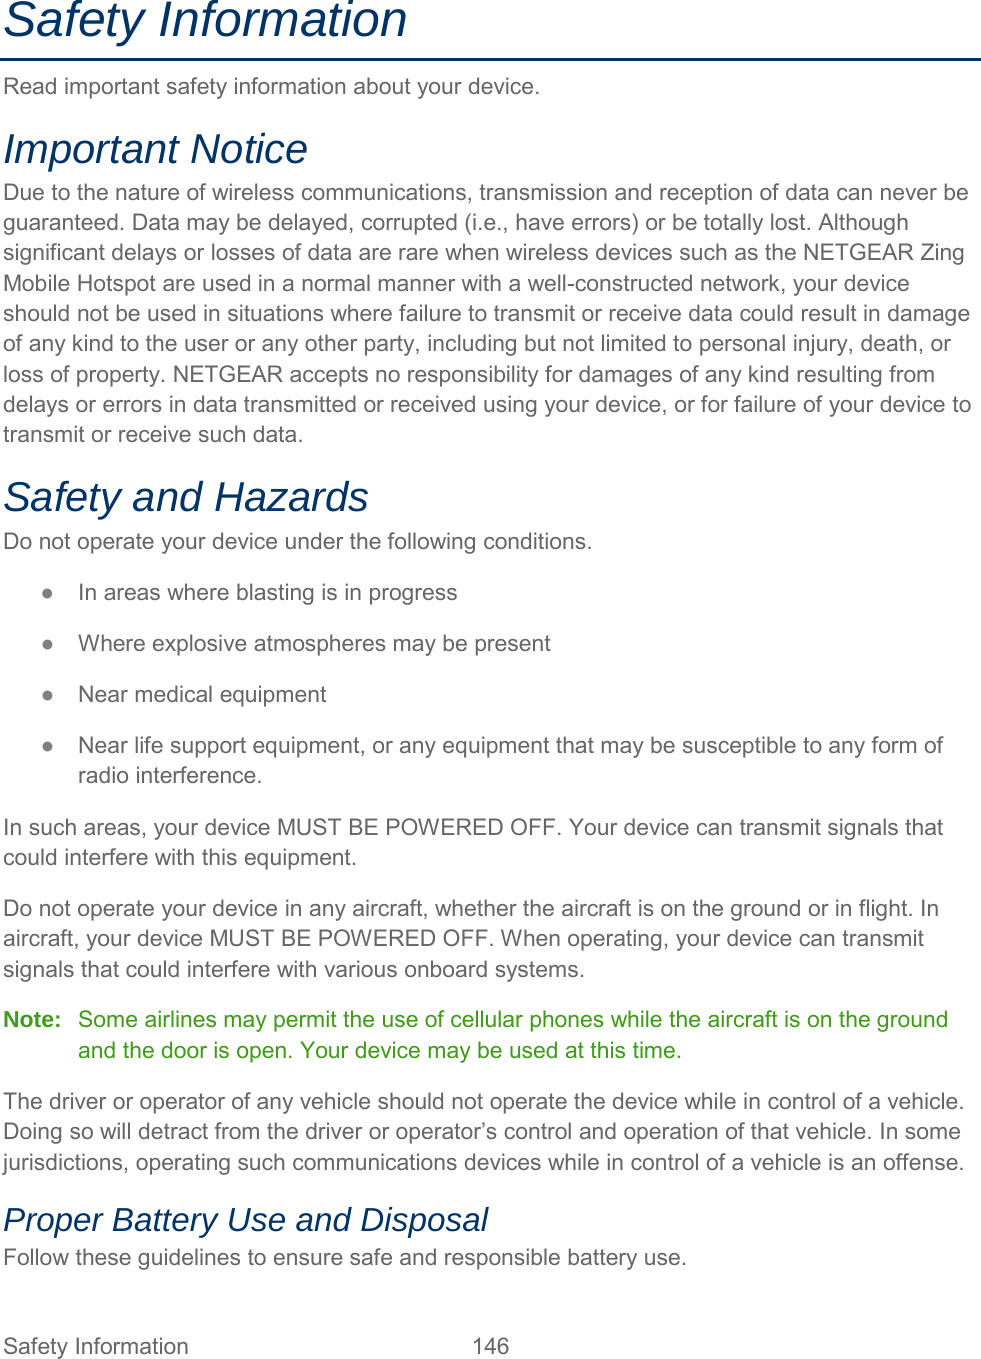 Safety Information Read important safety information about your device. Important Notice Due to the nature of wireless communications, transmission and reception of data can never be guaranteed. Data may be delayed, corrupted (i.e., have errors) or be totally lost. Although significant delays or losses of data are rare when wireless devices such as the NETGEAR Zing Mobile Hotspot are used in a normal manner with a well-constructed network, your device should not be used in situations where failure to transmit or receive data could result in damage of any kind to the user or any other party, including but not limited to personal injury, death, or loss of property. NETGEAR accepts no responsibility for damages of any kind resulting from delays or errors in data transmitted or received using your device, or for failure of your device to transmit or receive such data. Safety and Hazards Do not operate your device under the following conditions. ●  In areas where blasting is in progress ●  Where explosive atmospheres may be present ●  Near medical equipment ●  Near life support equipment, or any equipment that may be susceptible to any form of radio interference. In such areas, your device MUST BE POWERED OFF. Your device can transmit signals that could interfere with this equipment. Do not operate your device in any aircraft, whether the aircraft is on the ground or in flight. In aircraft, your device MUST BE POWERED OFF. When operating, your device can transmit signals that could interfere with various onboard systems. Note:   Some airlines may permit the use of cellular phones while the aircraft is on the ground and the door is open. Your device may be used at this time. The driver or operator of any vehicle should not operate the device while in control of a vehicle. Doing so will detract from the driver or operator’s control and operation of that vehicle. In some jurisdictions, operating such communications devices while in control of a vehicle is an offense. Proper Battery Use and Disposal Follow these guidelines to ensure safe and responsible battery use. Safety Information 146   